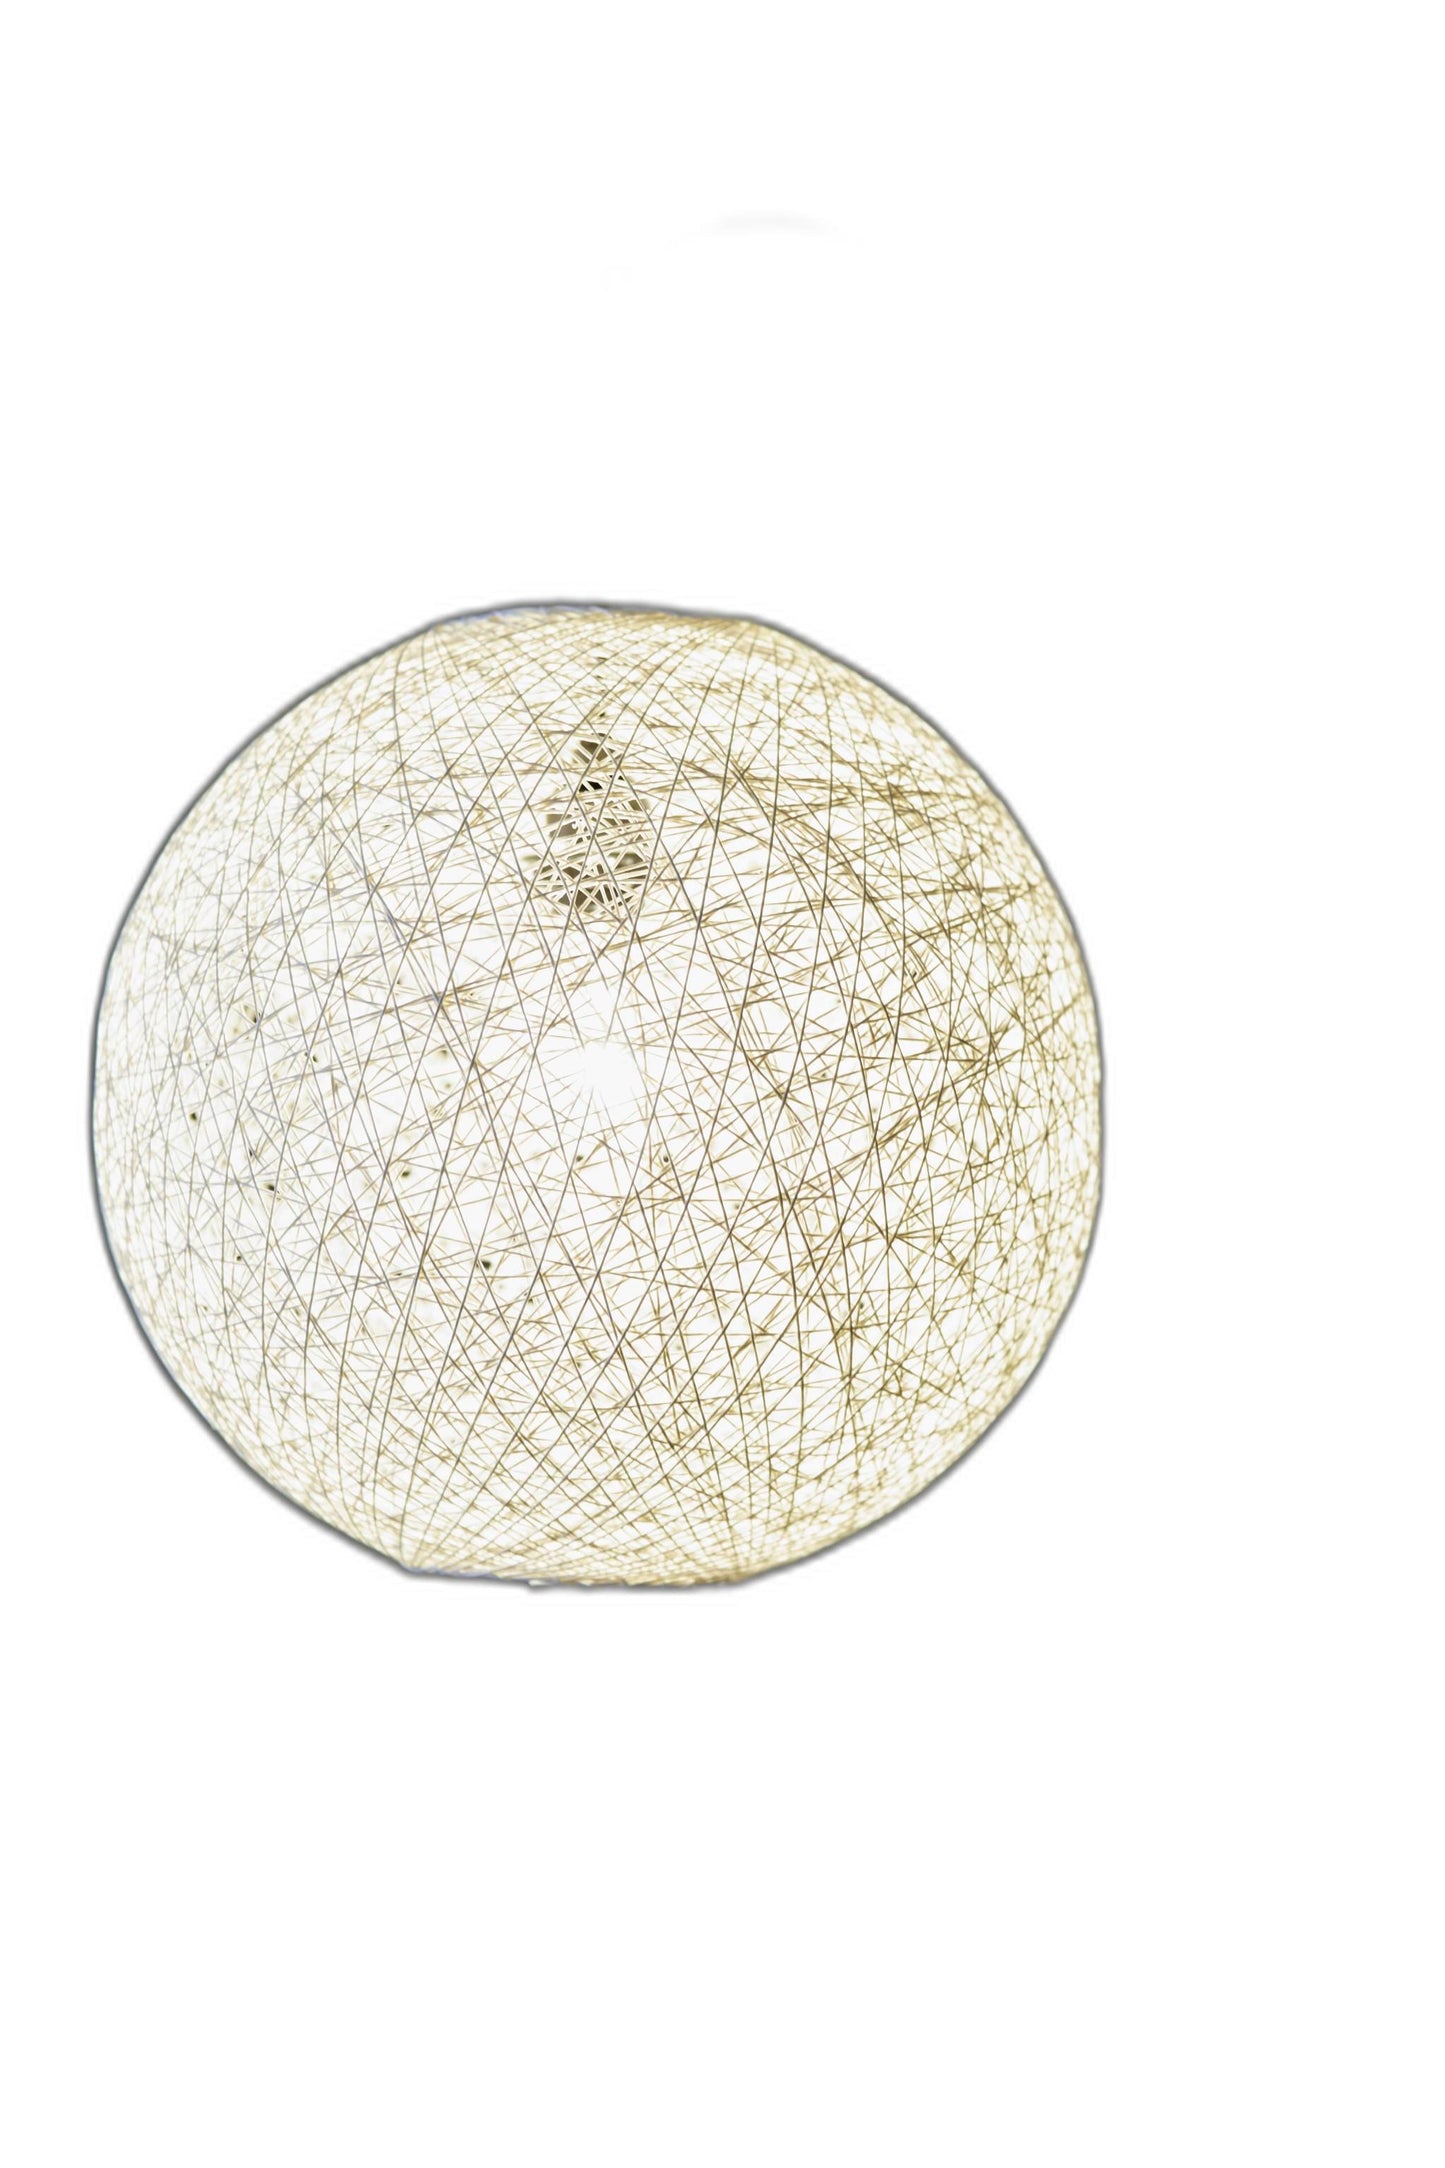 Floor Lamp With Bronze Metal Arc And Groovy Rattan String Ball Shade